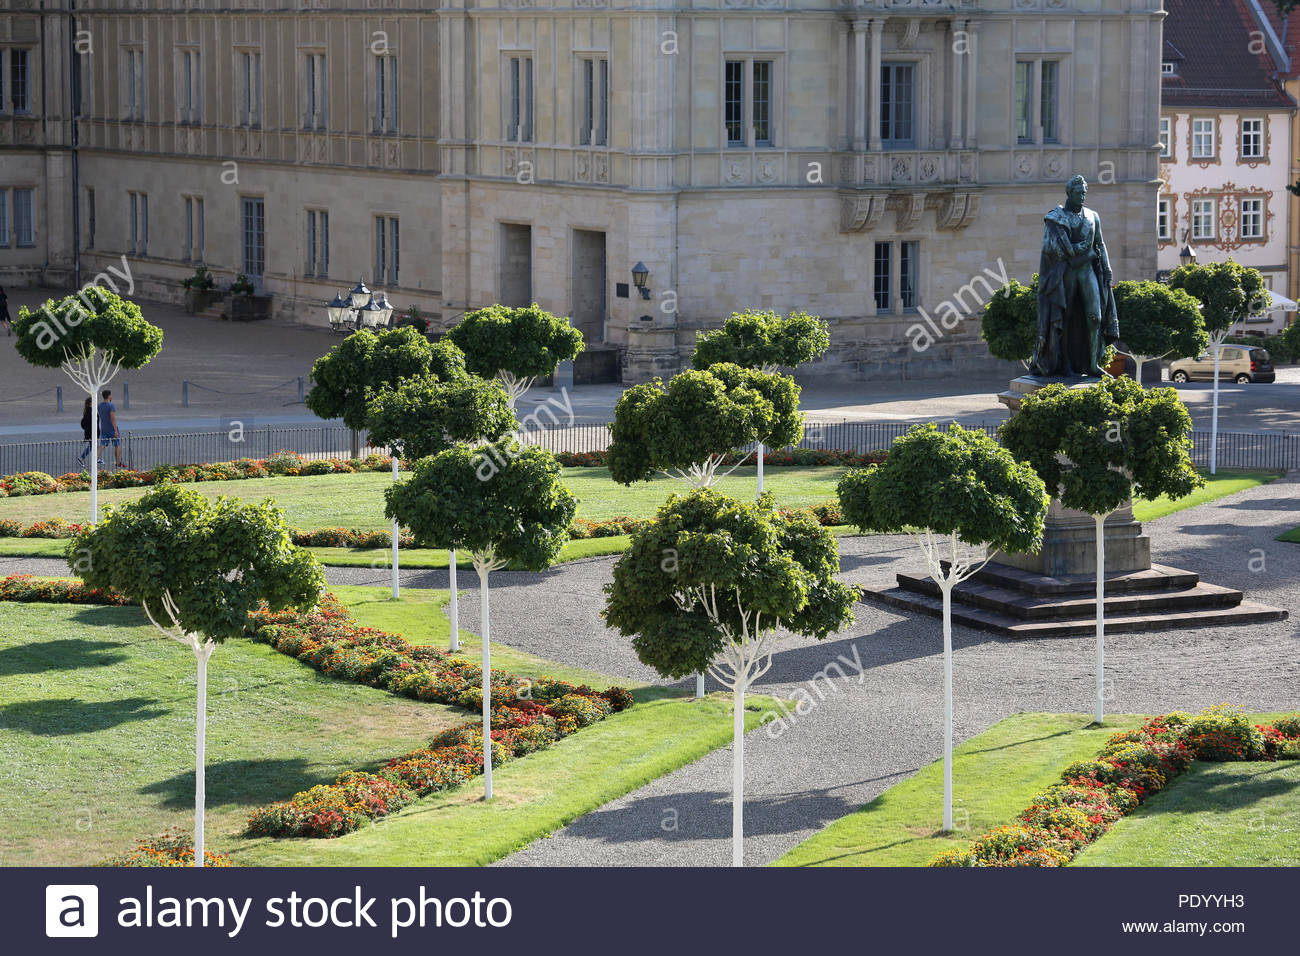 A view of a section of Castle Square (Schlossplatz) in the Franconian town of Coburg, Germany on a sunny day with shadows and a statue to Ernst I. Stock Photo